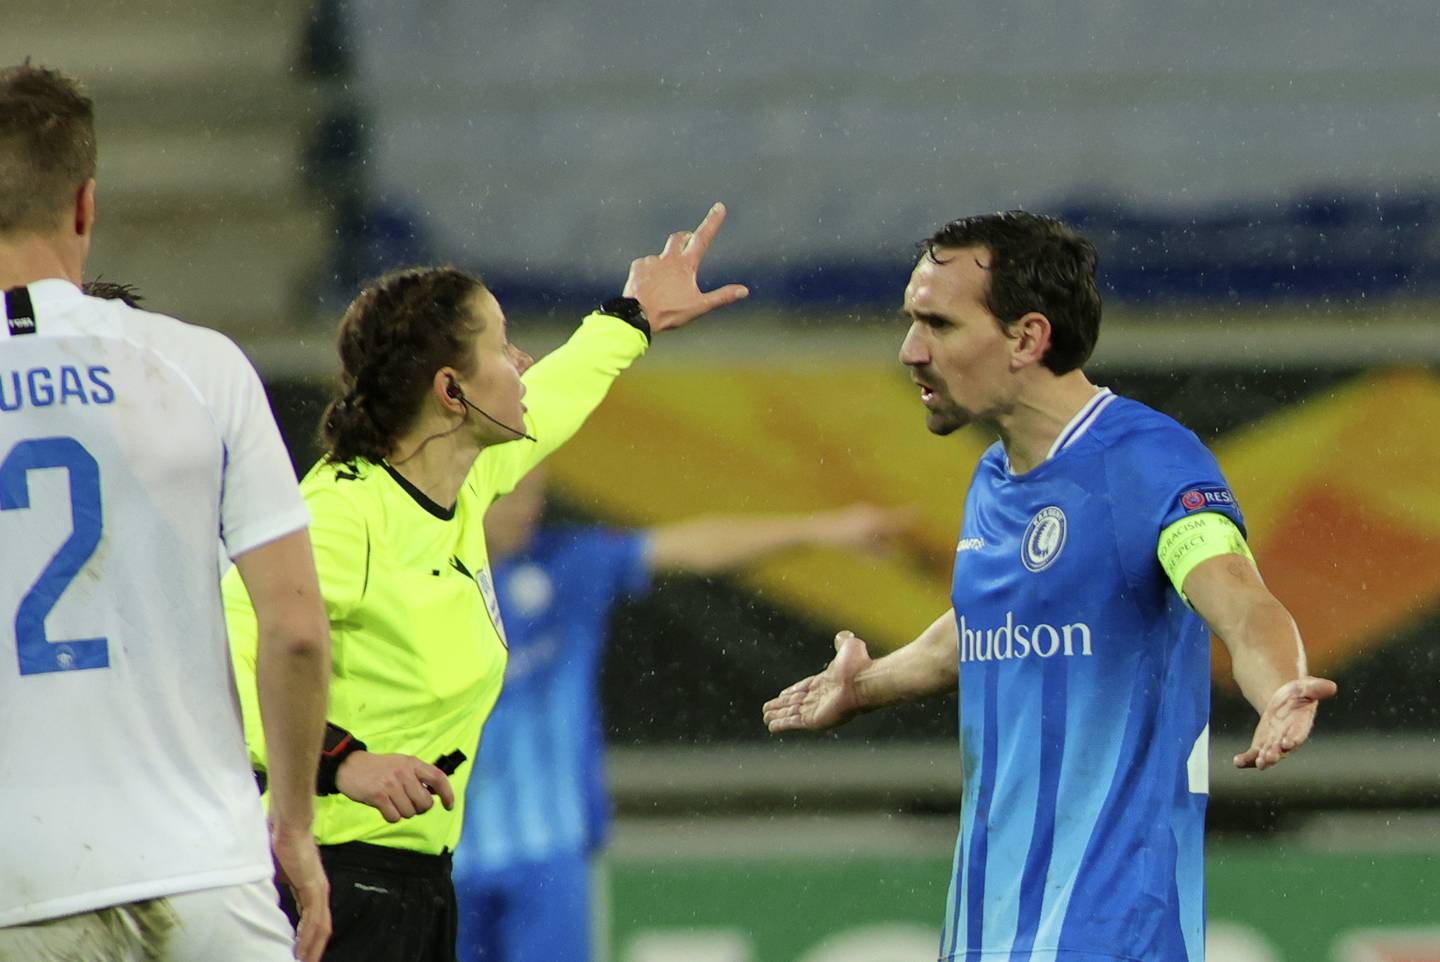 Gent's Sven Kums, right, disputes a call by referee Kateryna Monzul, left, during the Europa League Group L soccer match between Gent and Slovan Liberec at the Ghelamco stadium in Ghent, Belgium, Thursday, Dec. 3, 2020. (AP Photo/Olivier Matthys)